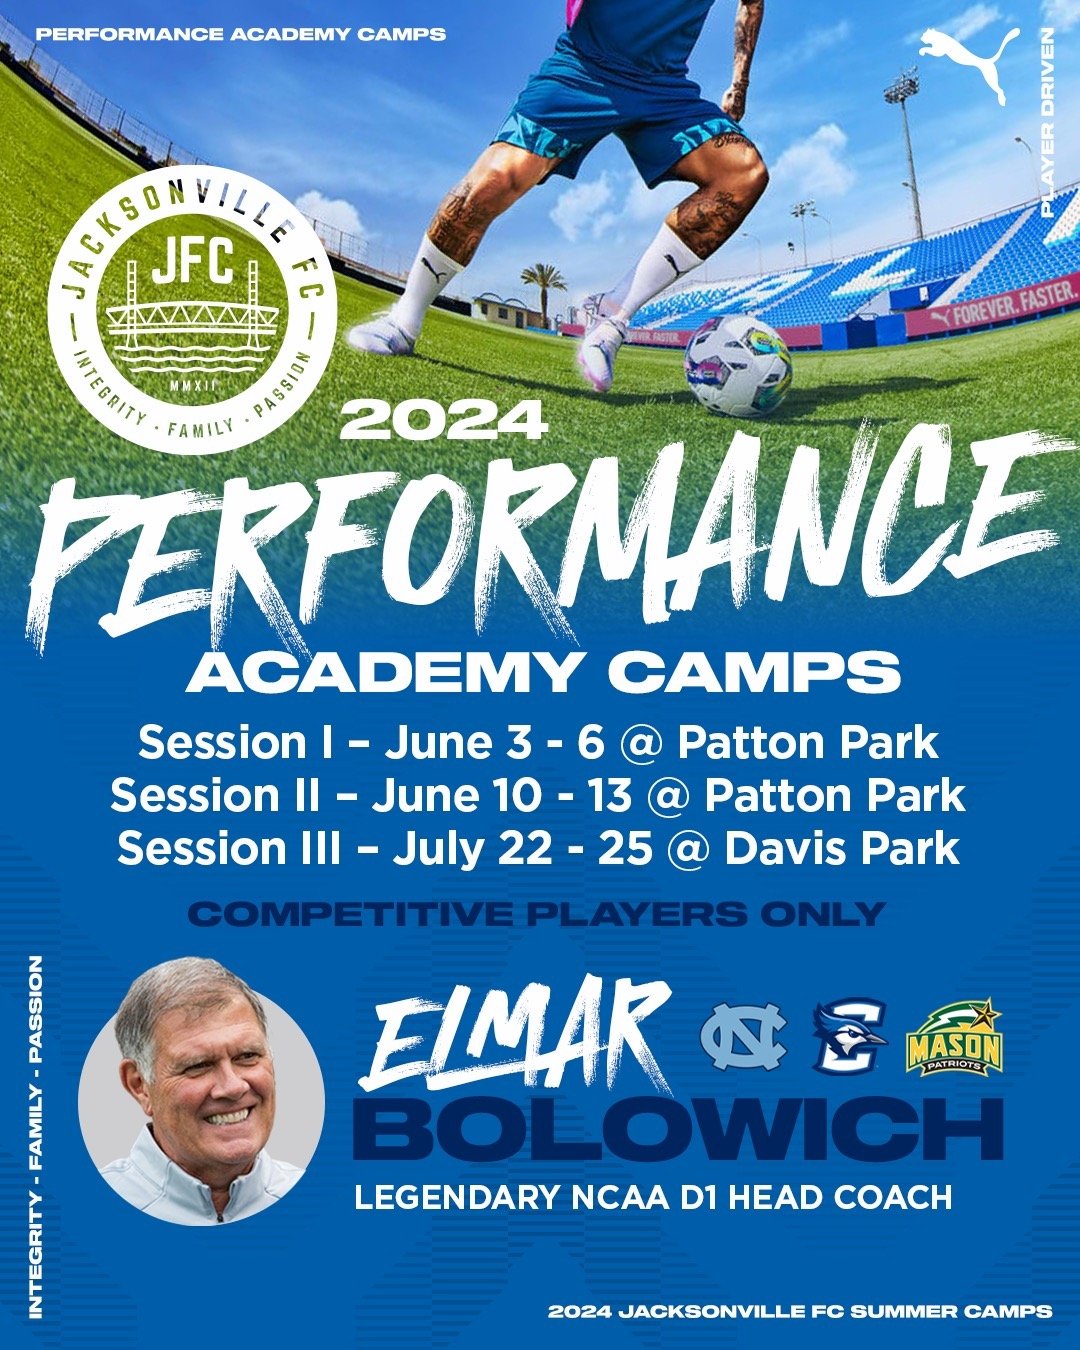 You still have time to sign up for our 2024 JFC Performance Academy Camps for competitive players only at Patton and Davis Park in June and July with Coach Elmar Bolowich.

Visit jfcsoccer.com for more information and to sign up today.

#PlayerDriven